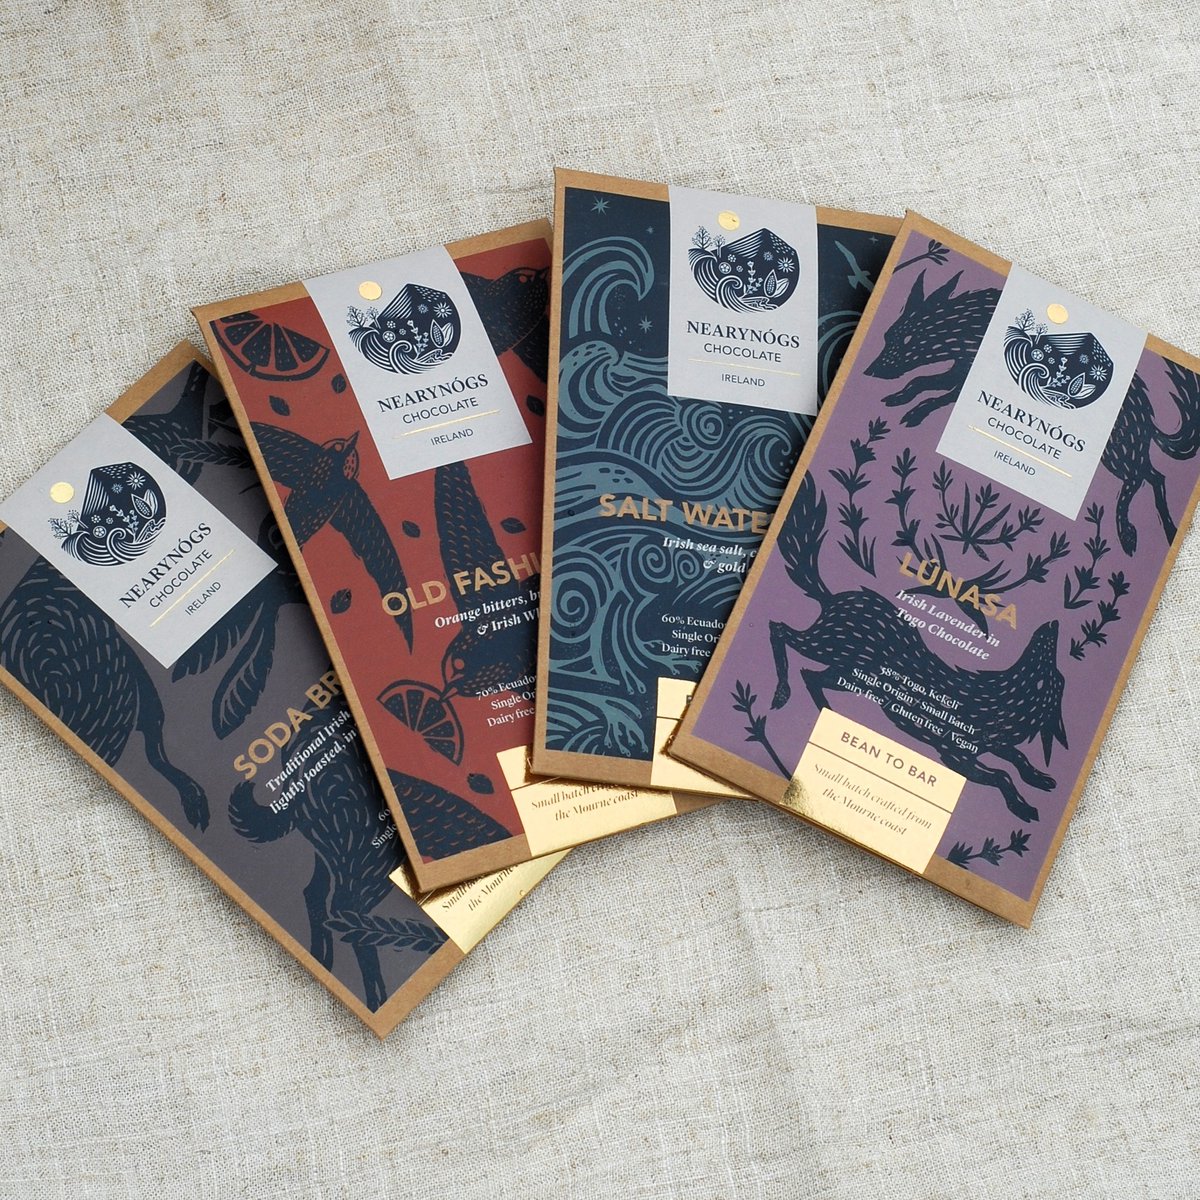 📣New bars from NearyNógs

With fancy new packaging and in larger 60g bars, we're delighted to welcome back NearyNógs. 

🆕Mourne Lúnasa Lavender
🆕Soda Bread
🔁Old Fashioned Irish
🔁Salt Water Days

#beantobar #craftchocolate  #chocolatebars #chocolate #beantobarchocolate